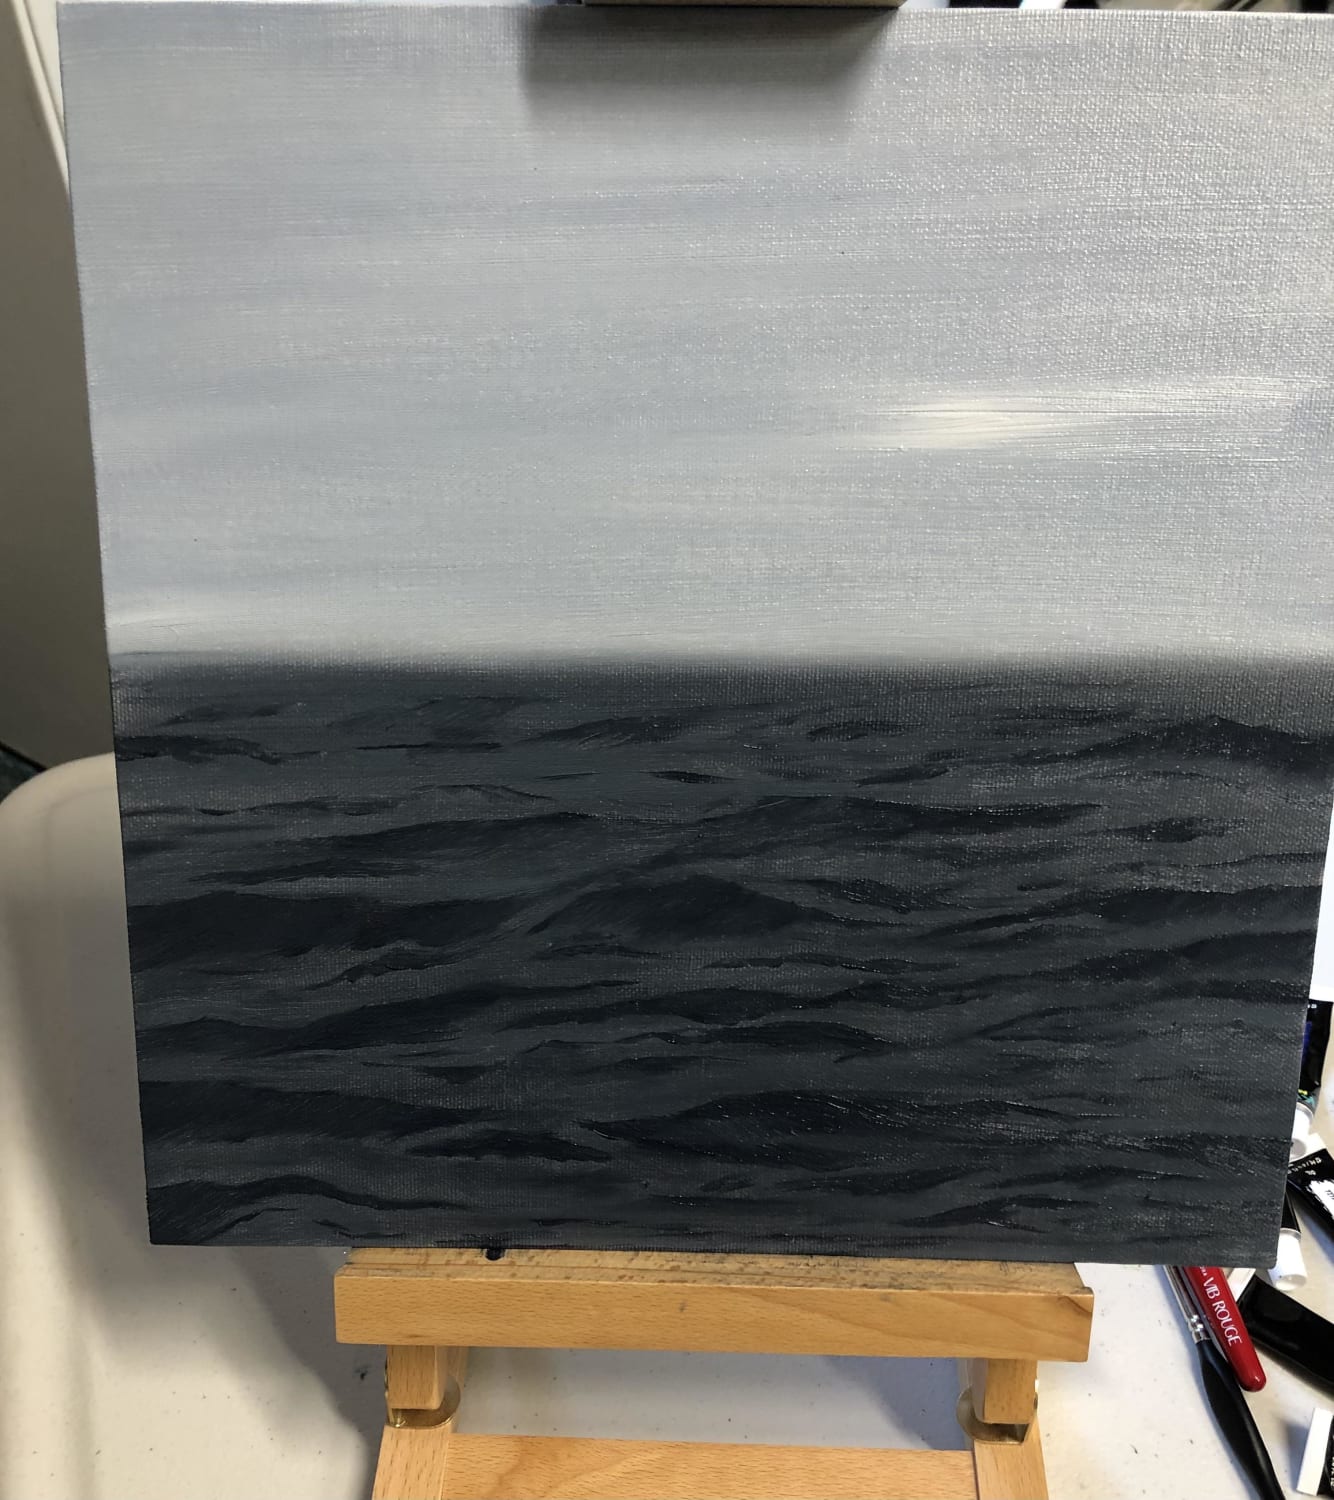 My first painting, if anyone could give me advice on how to make the waves look more realistic I would really appreciate it! (I used oil paint)